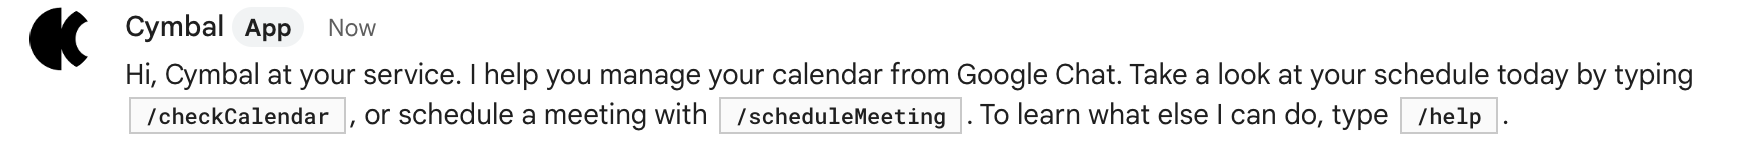 Example onboarding message for a scheduling Chat app.